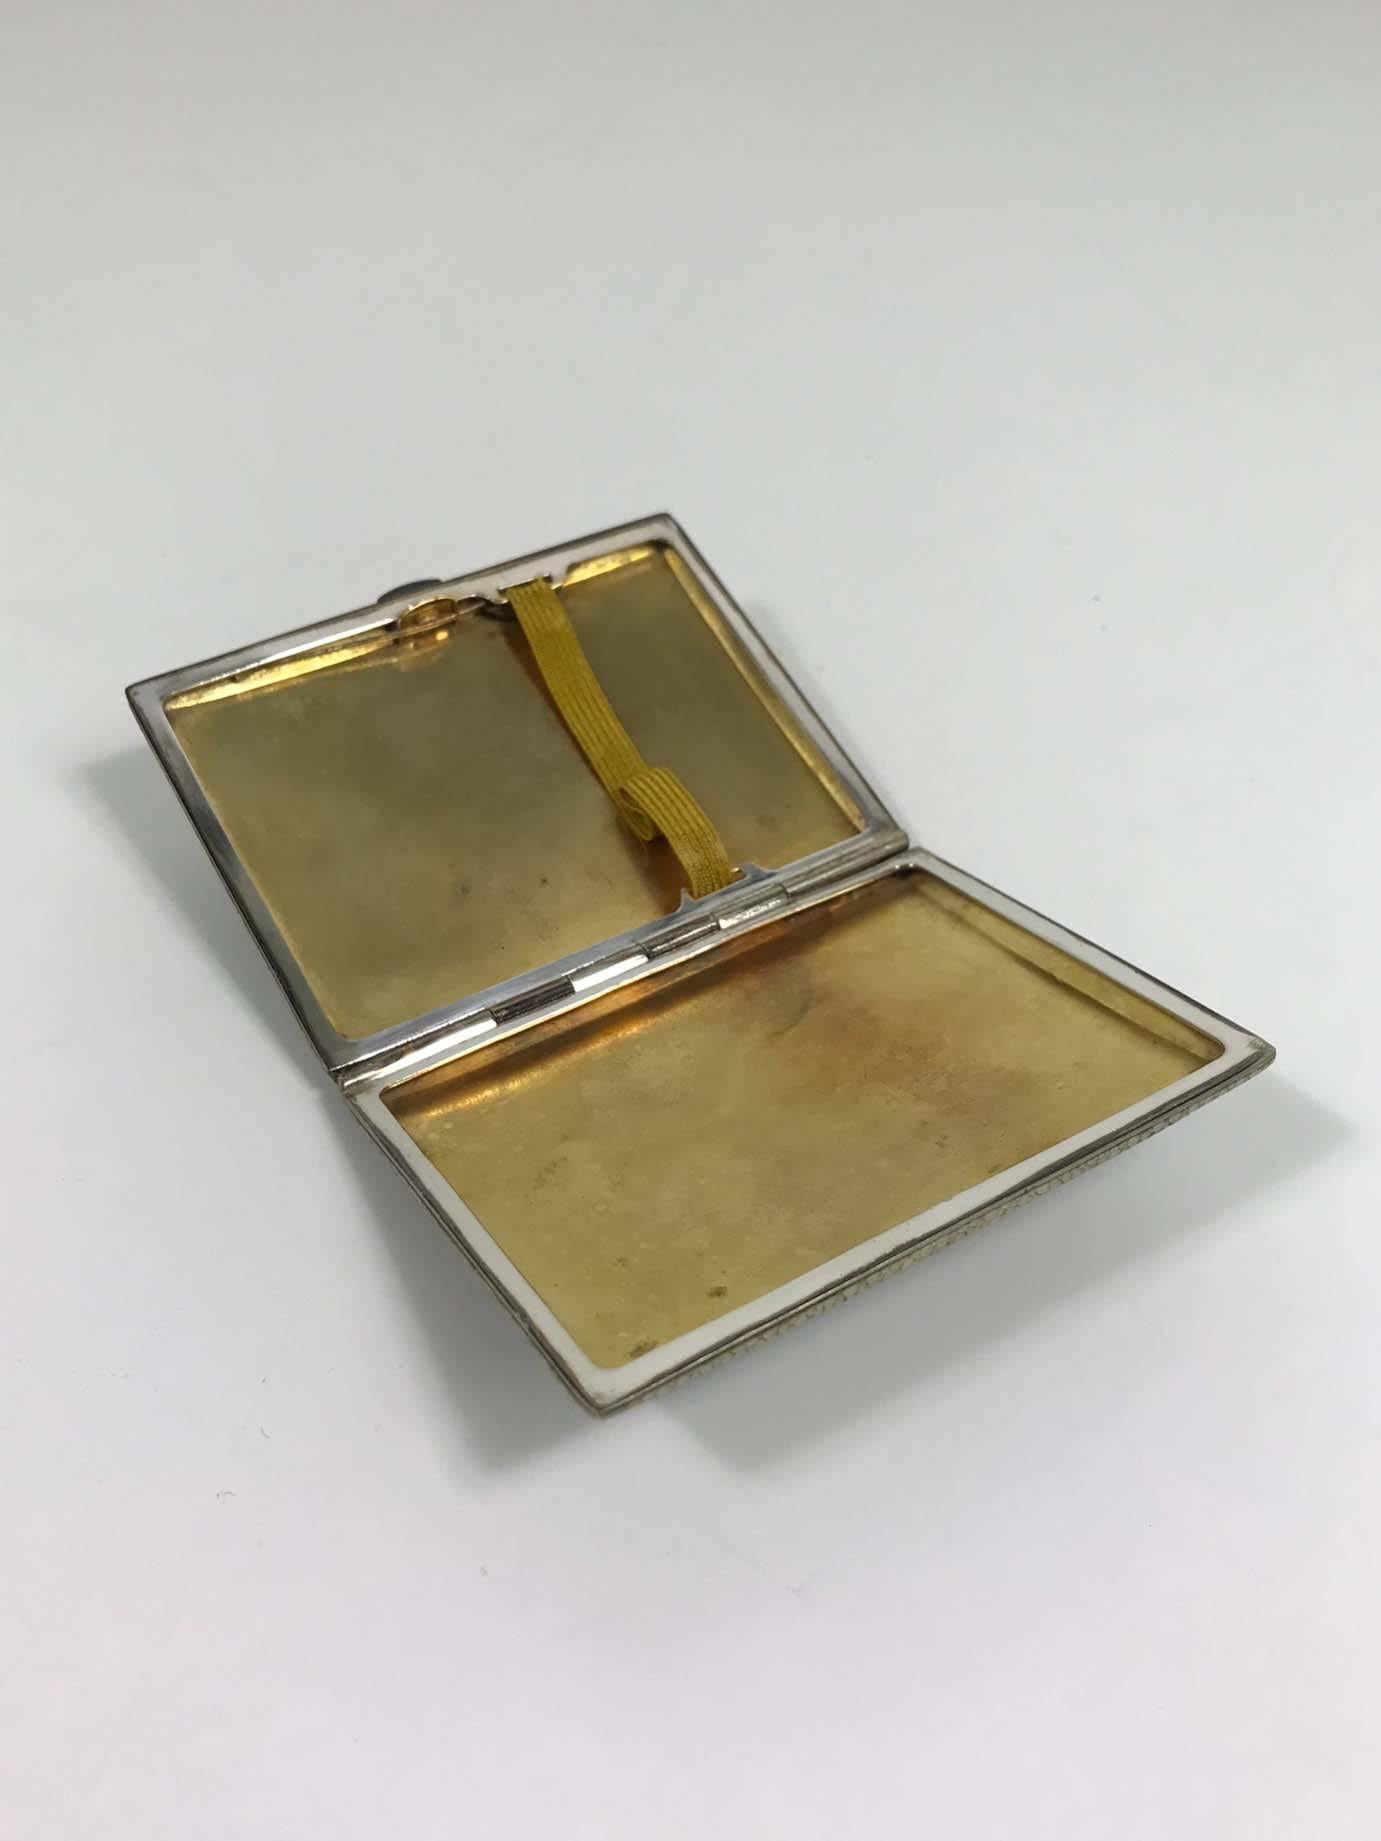 Shagreen Cigarette Case In Good Condition For Sale In Vancouver, BC